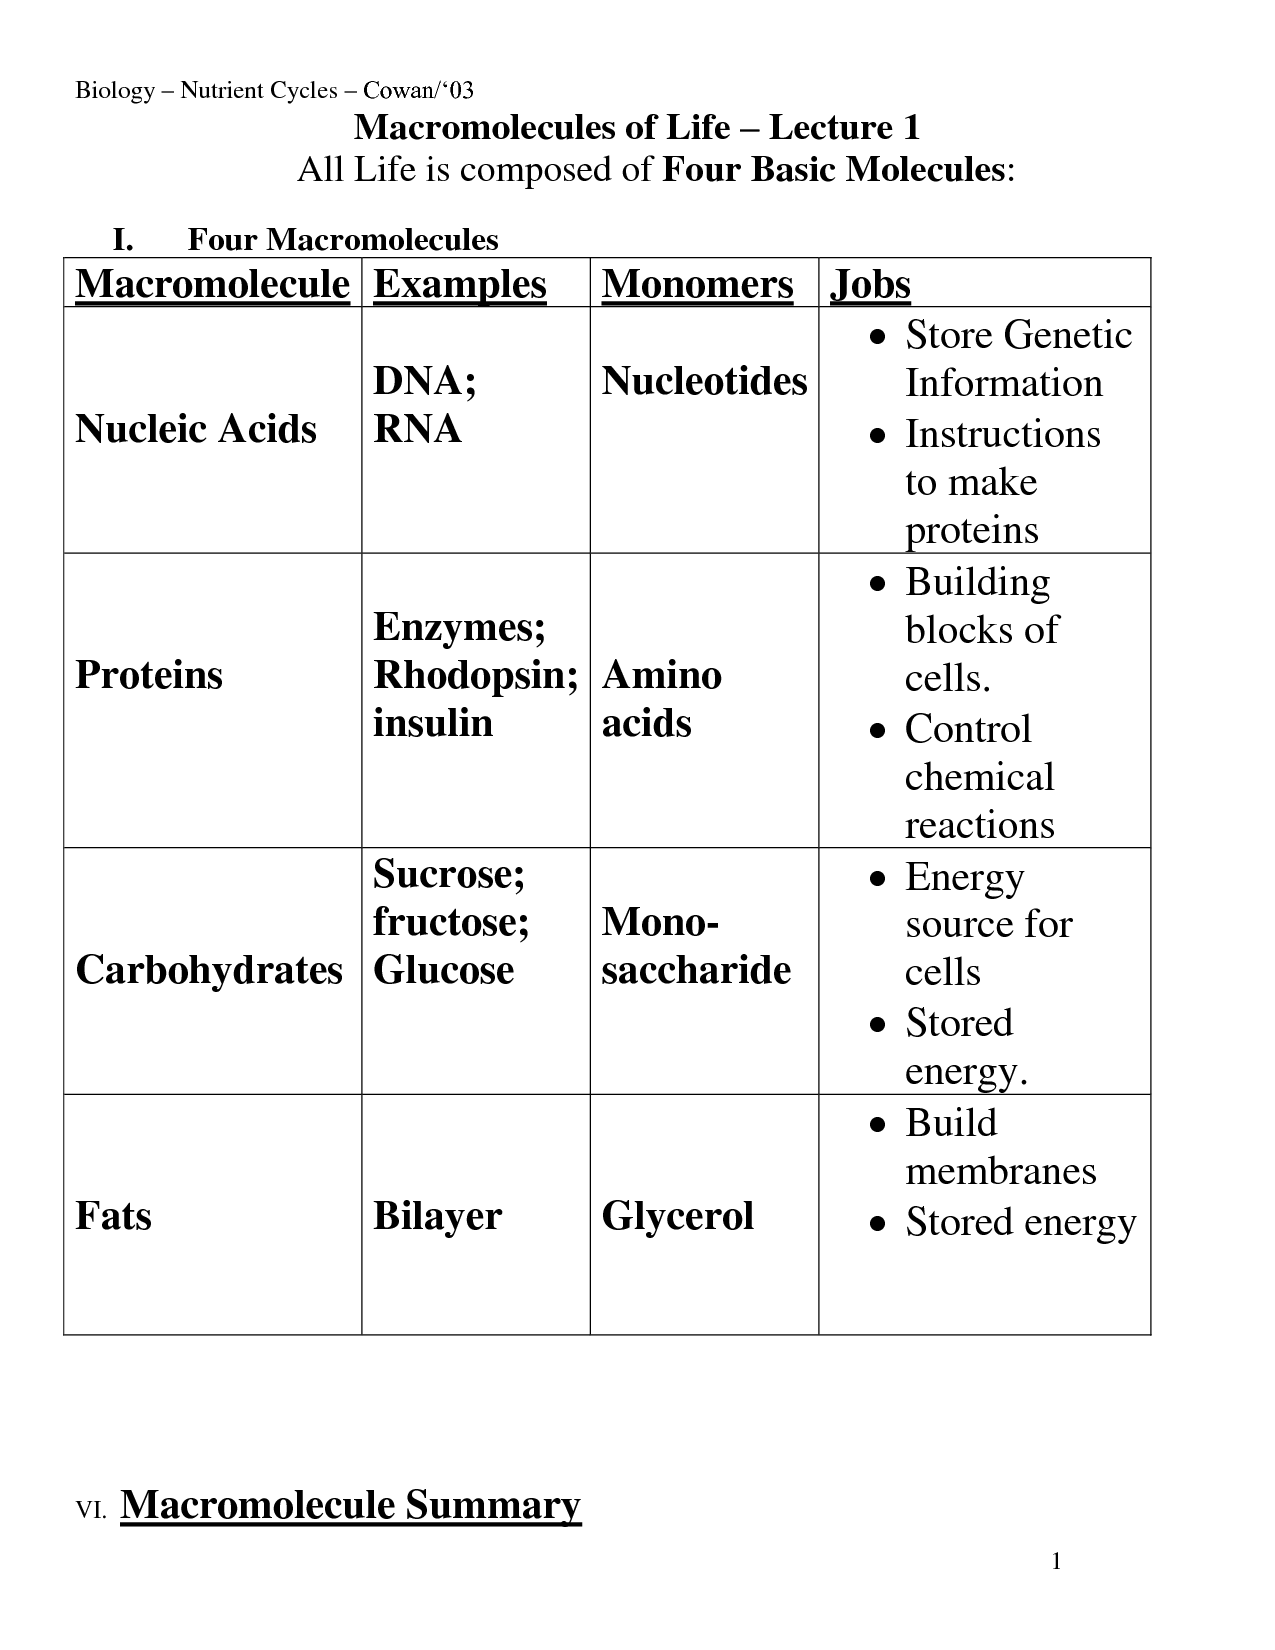 4 Macromolecules and Their Functions